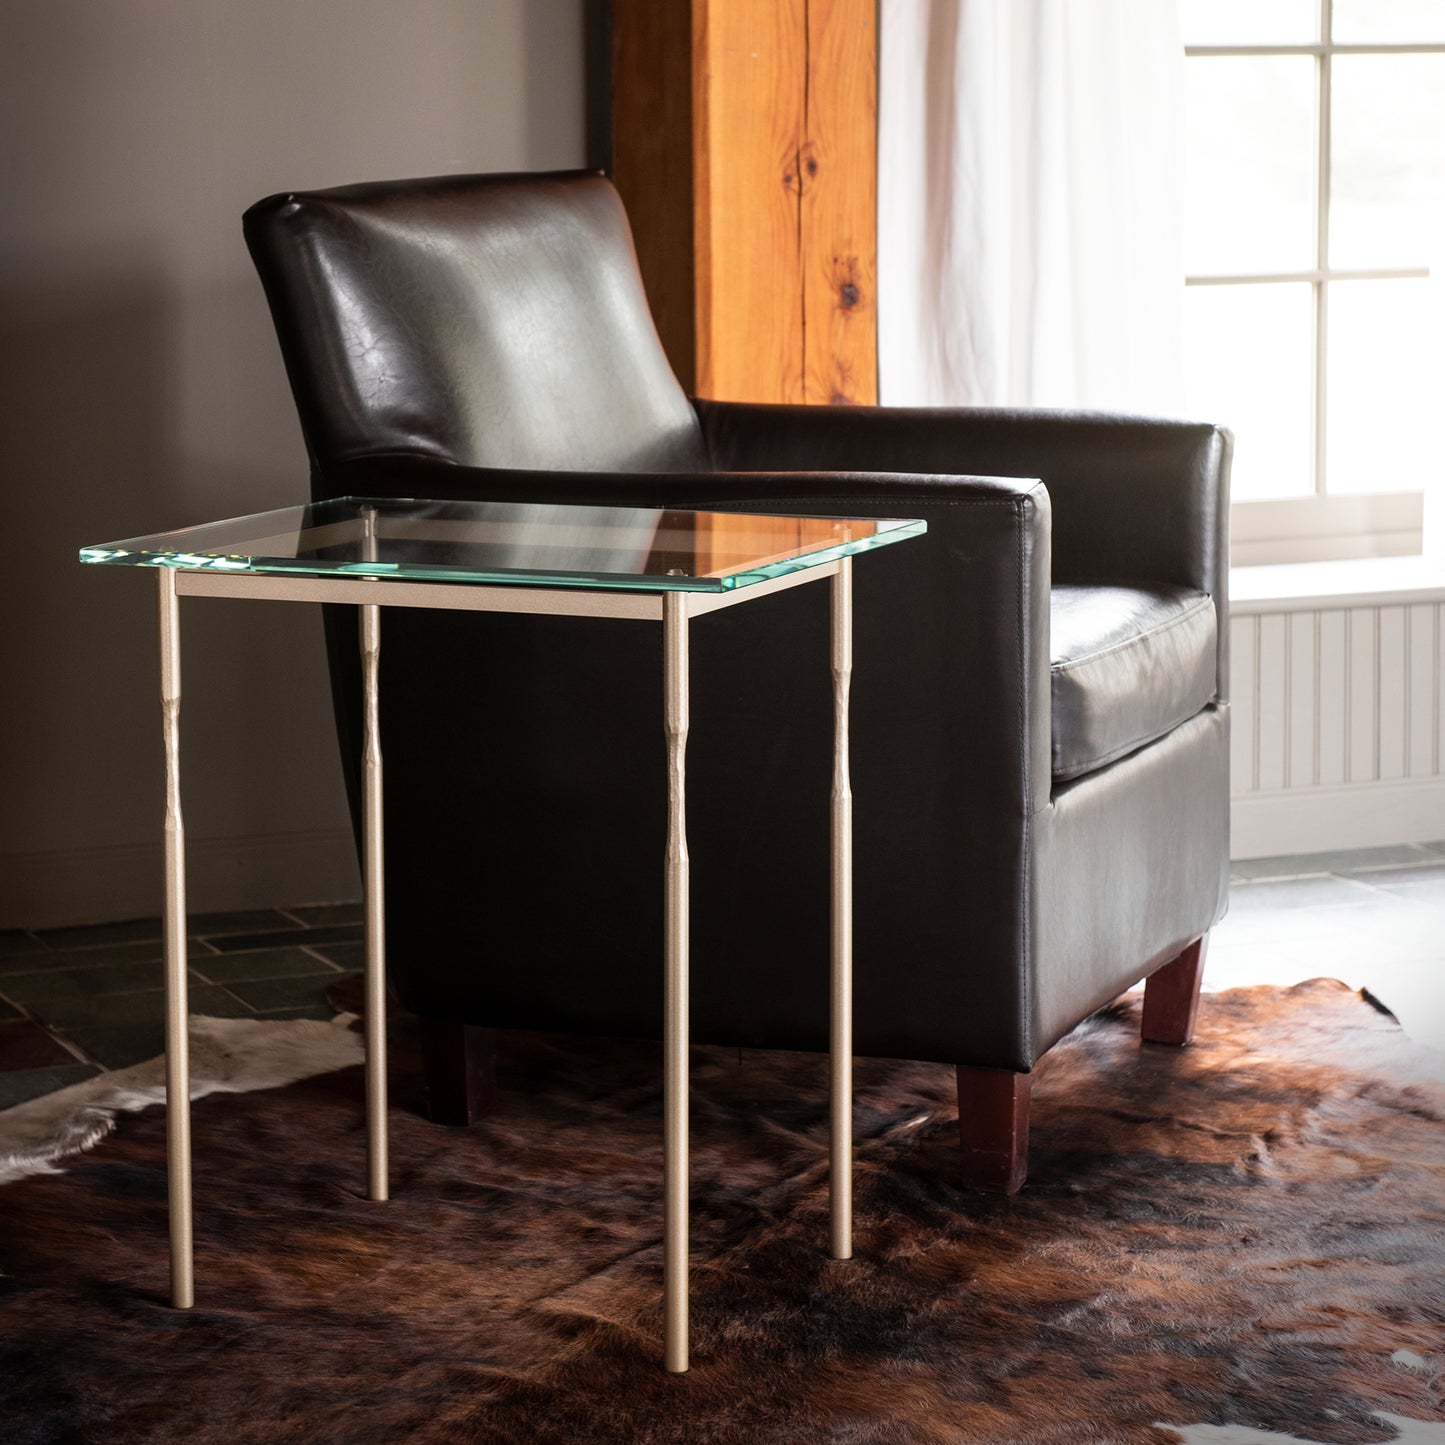 The modern home is beautifully enhanced with the elegant addition of the Hubbardton Forge Senza Side Table, featuring a sleek glass top and complemented by a leather chair of fine tailoring.